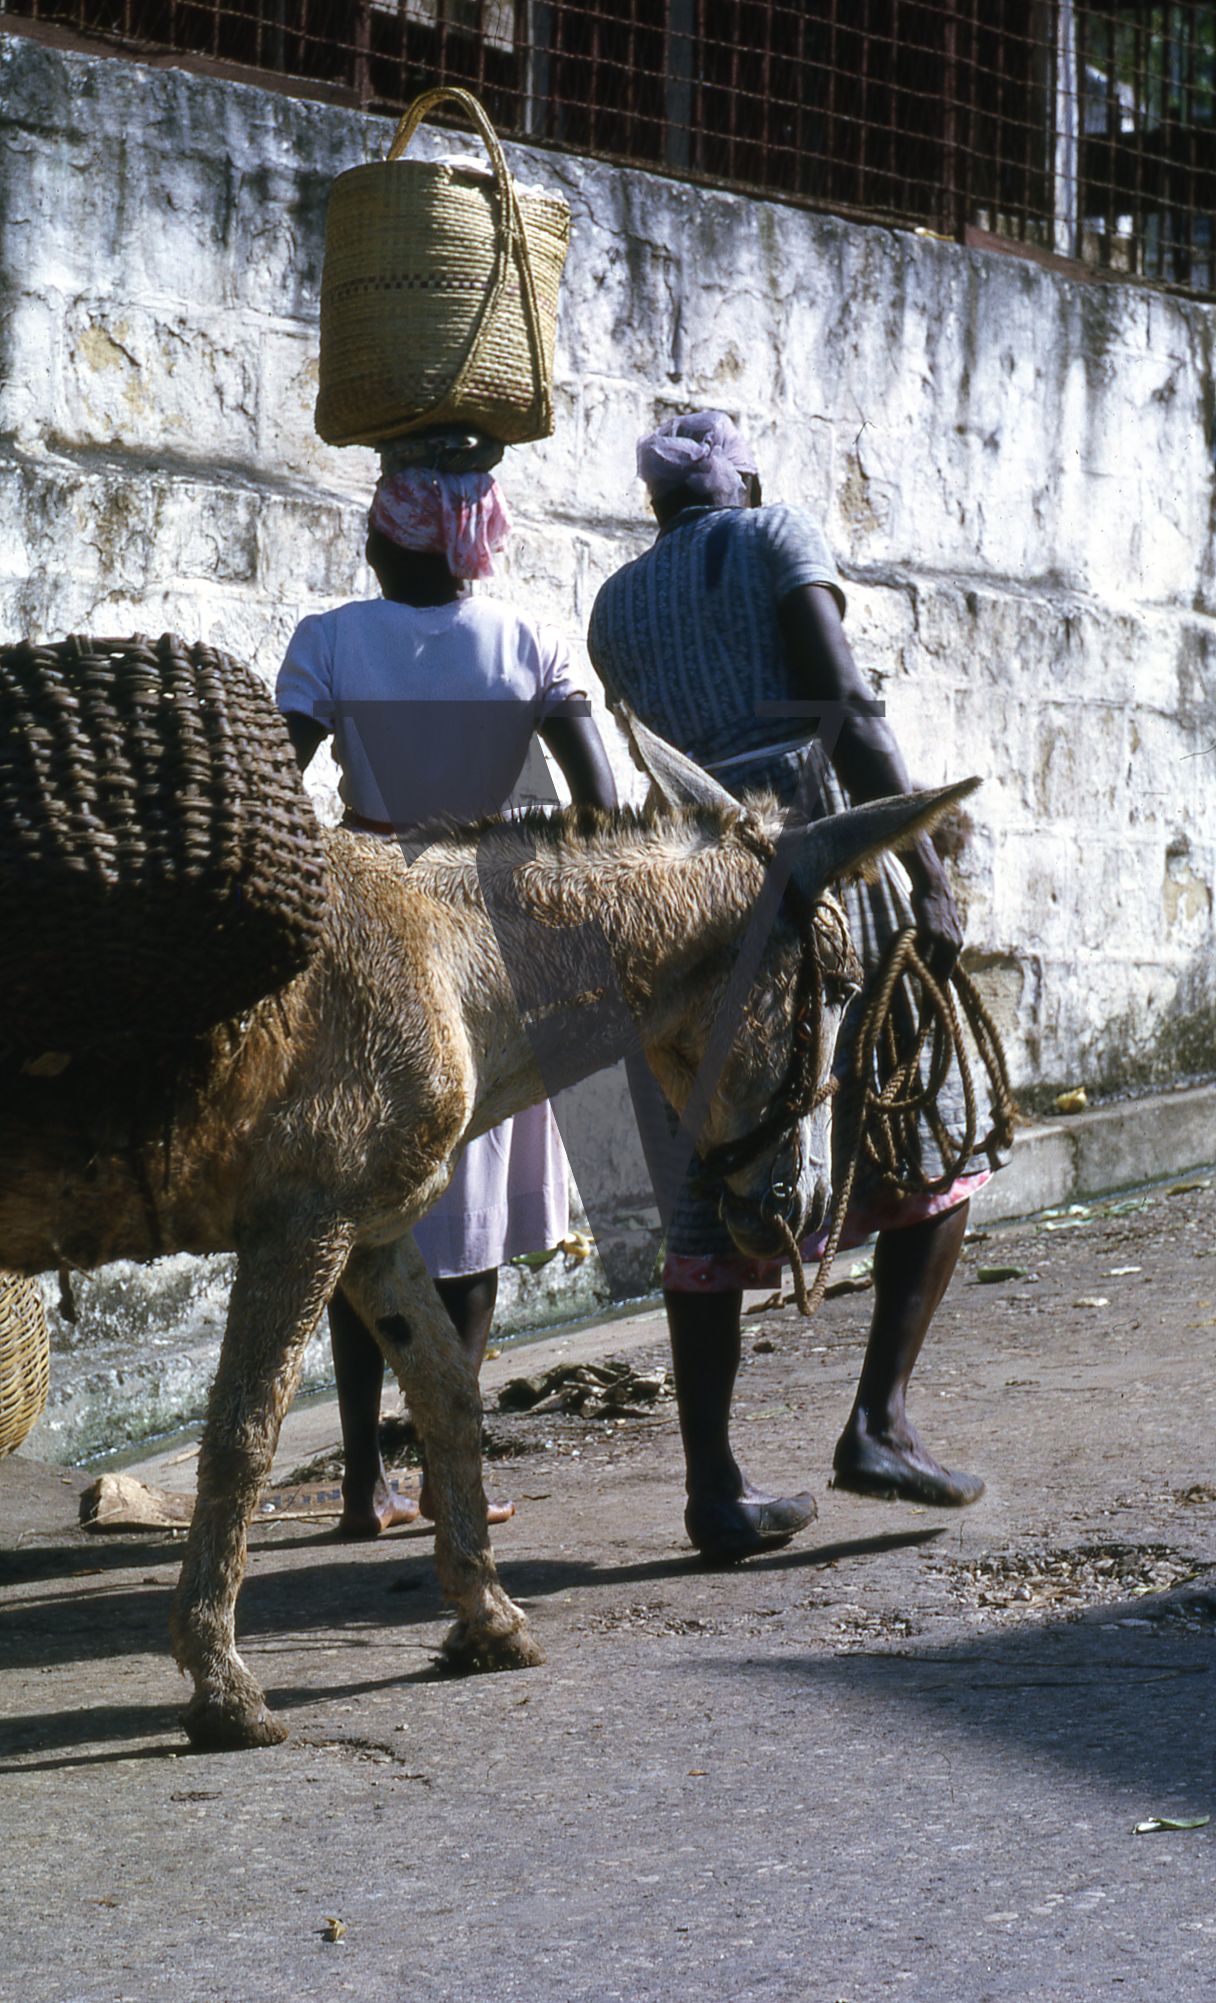 Jamaica, Donkey carries things up hill.